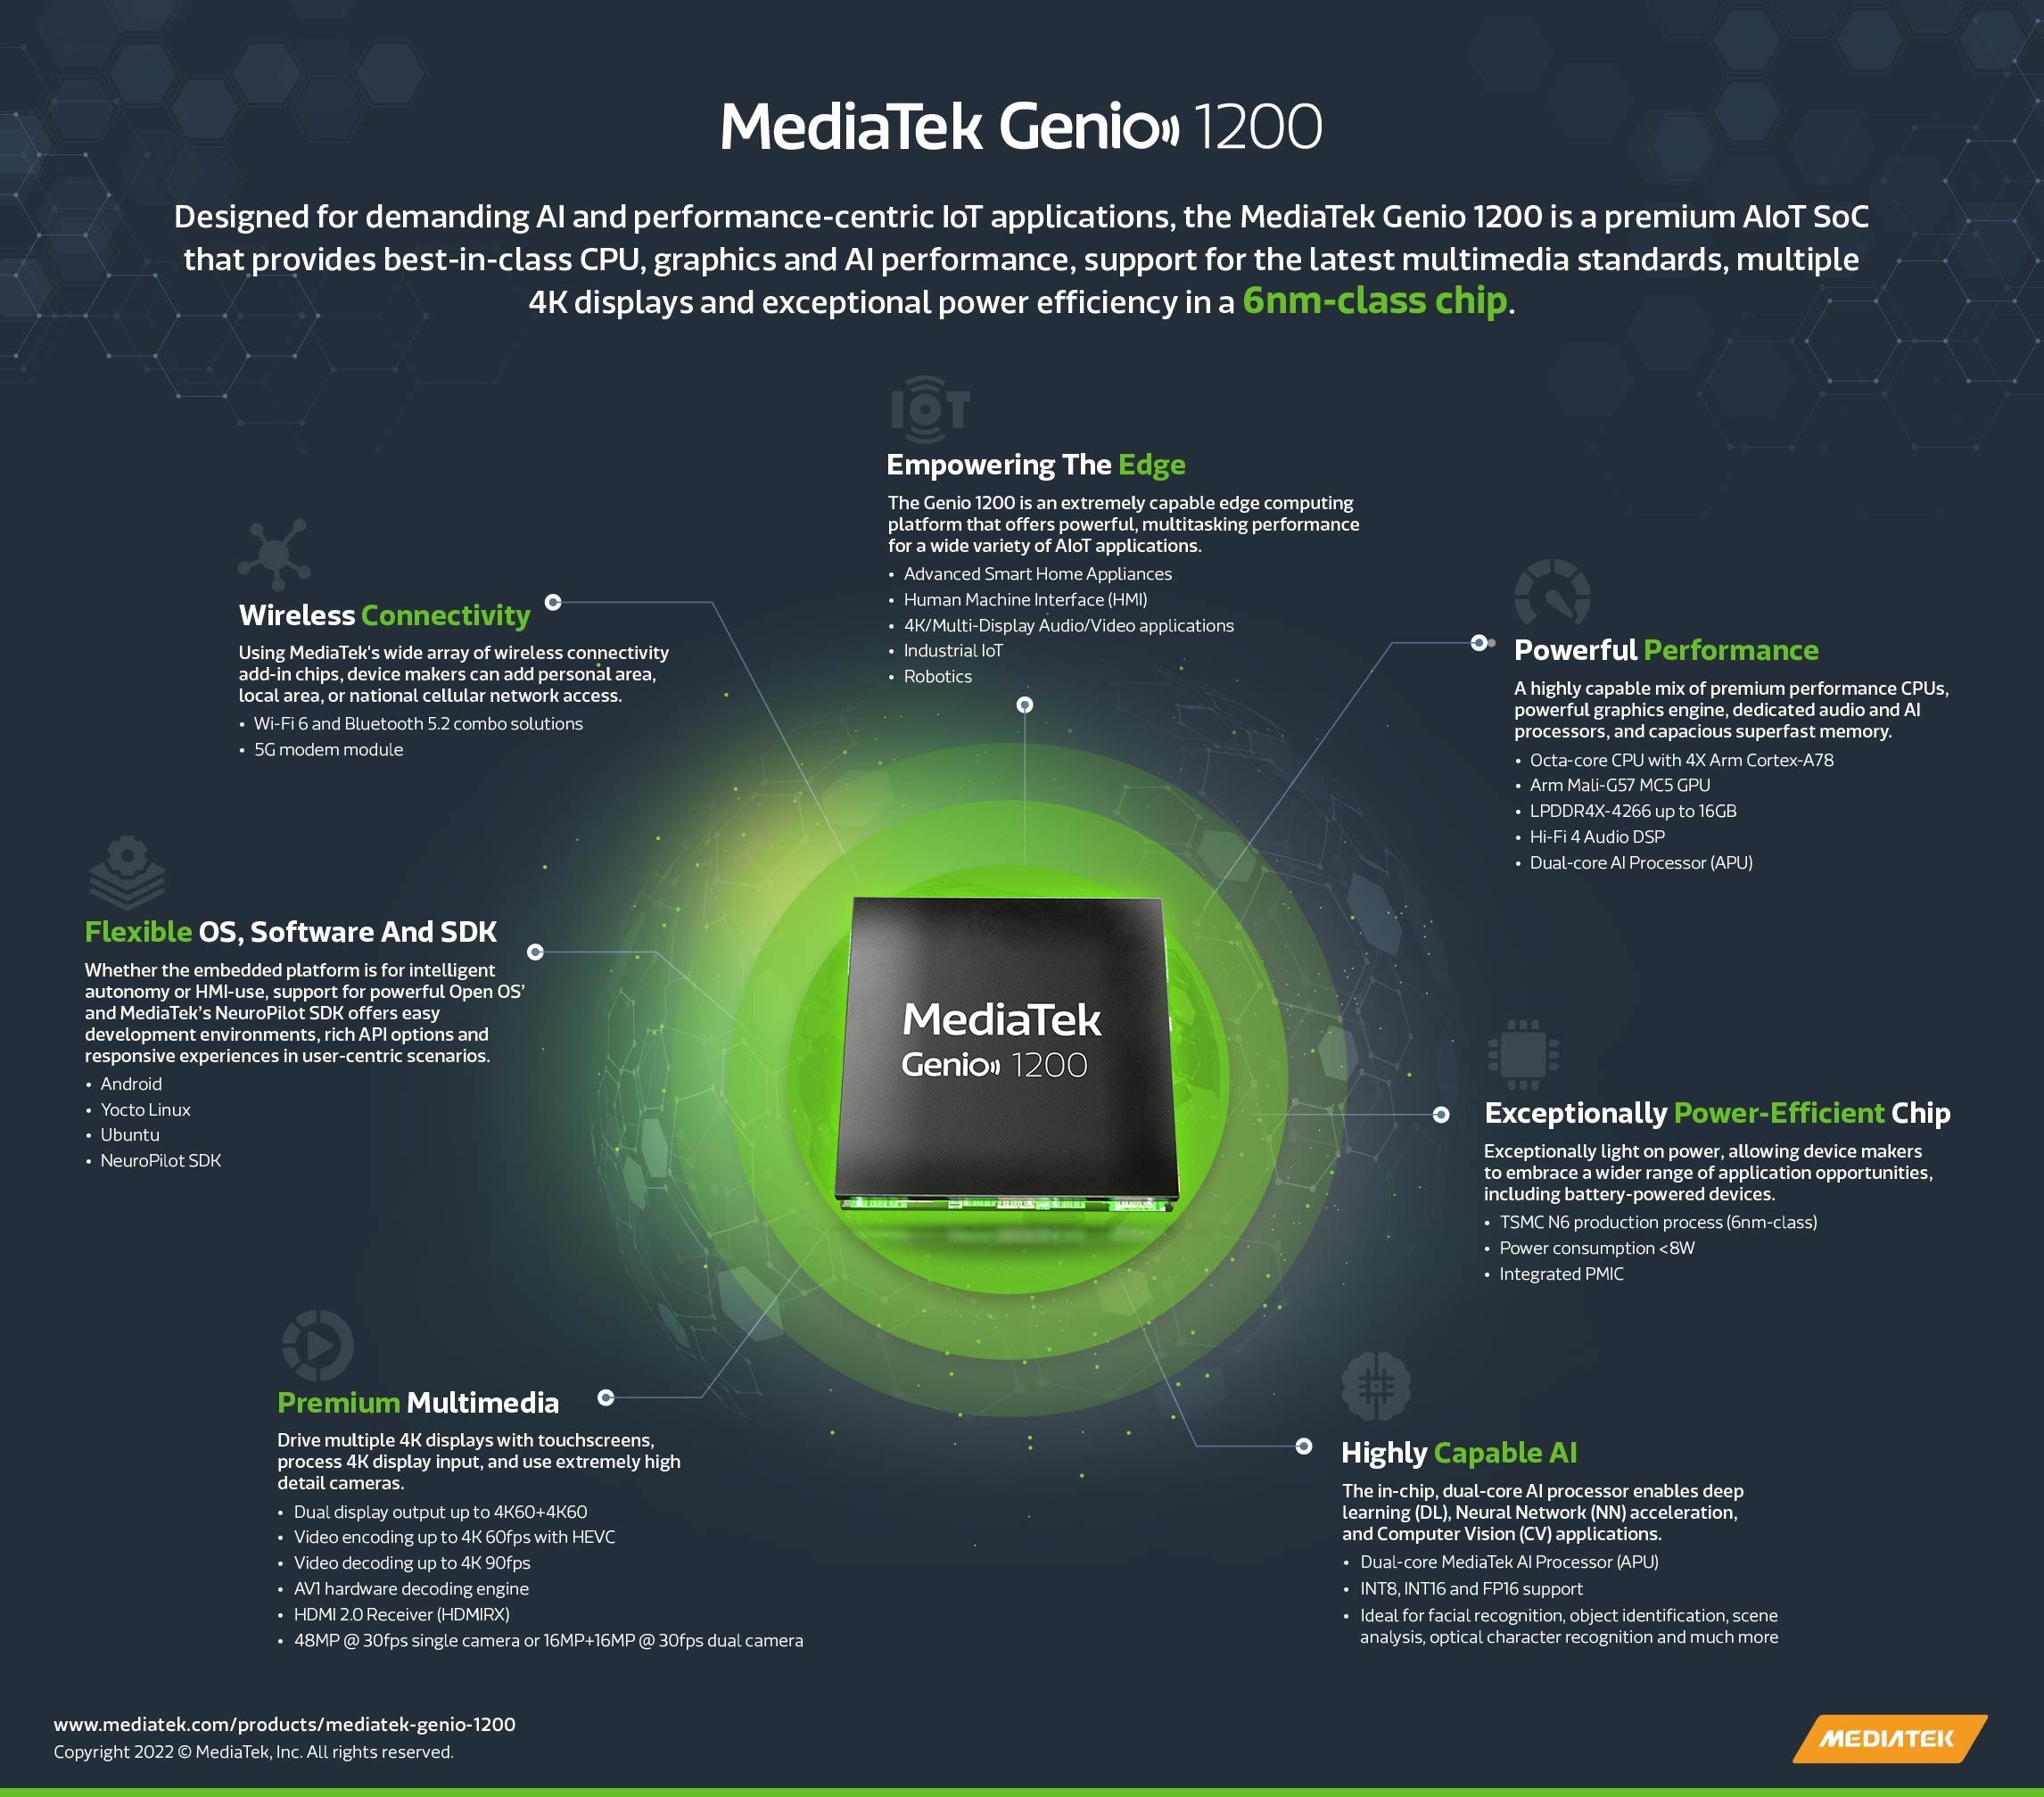 MediaTek Unveils New AIoT Platform Stack and Introduces the Genio 1200 AIoT Chip